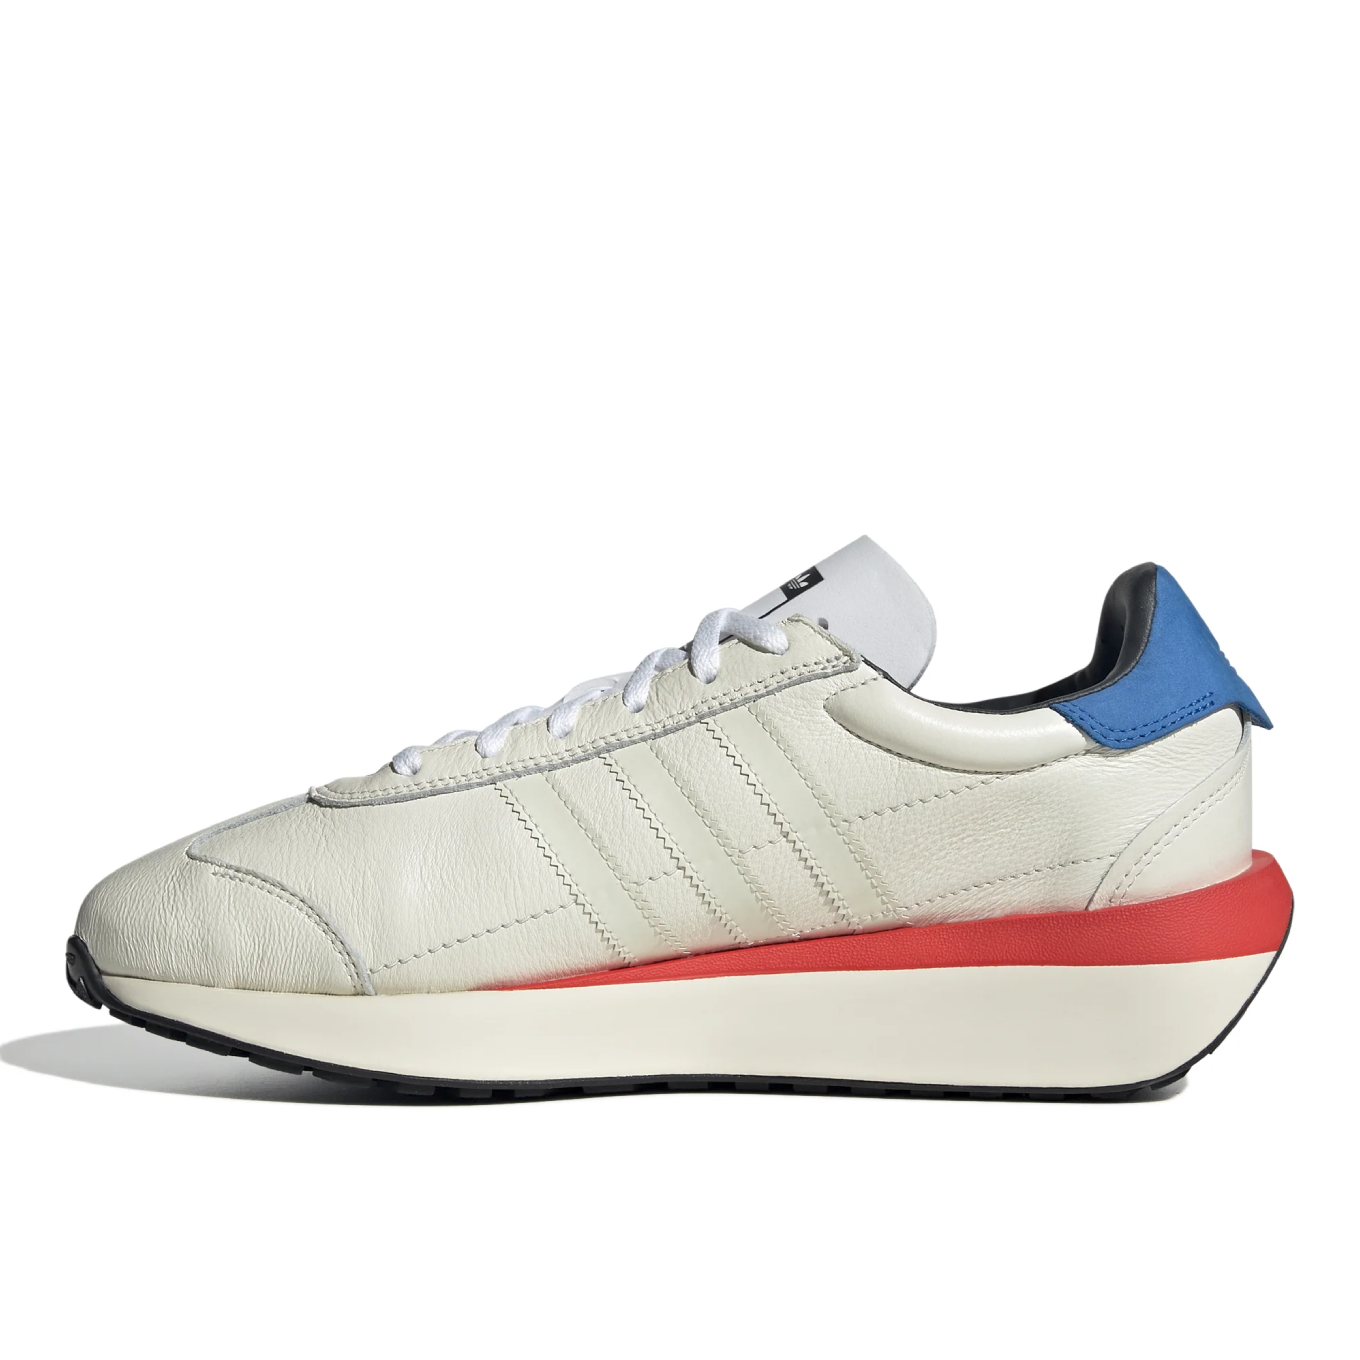 Adidas Sportswear and Footwear - Elevate Your Style and